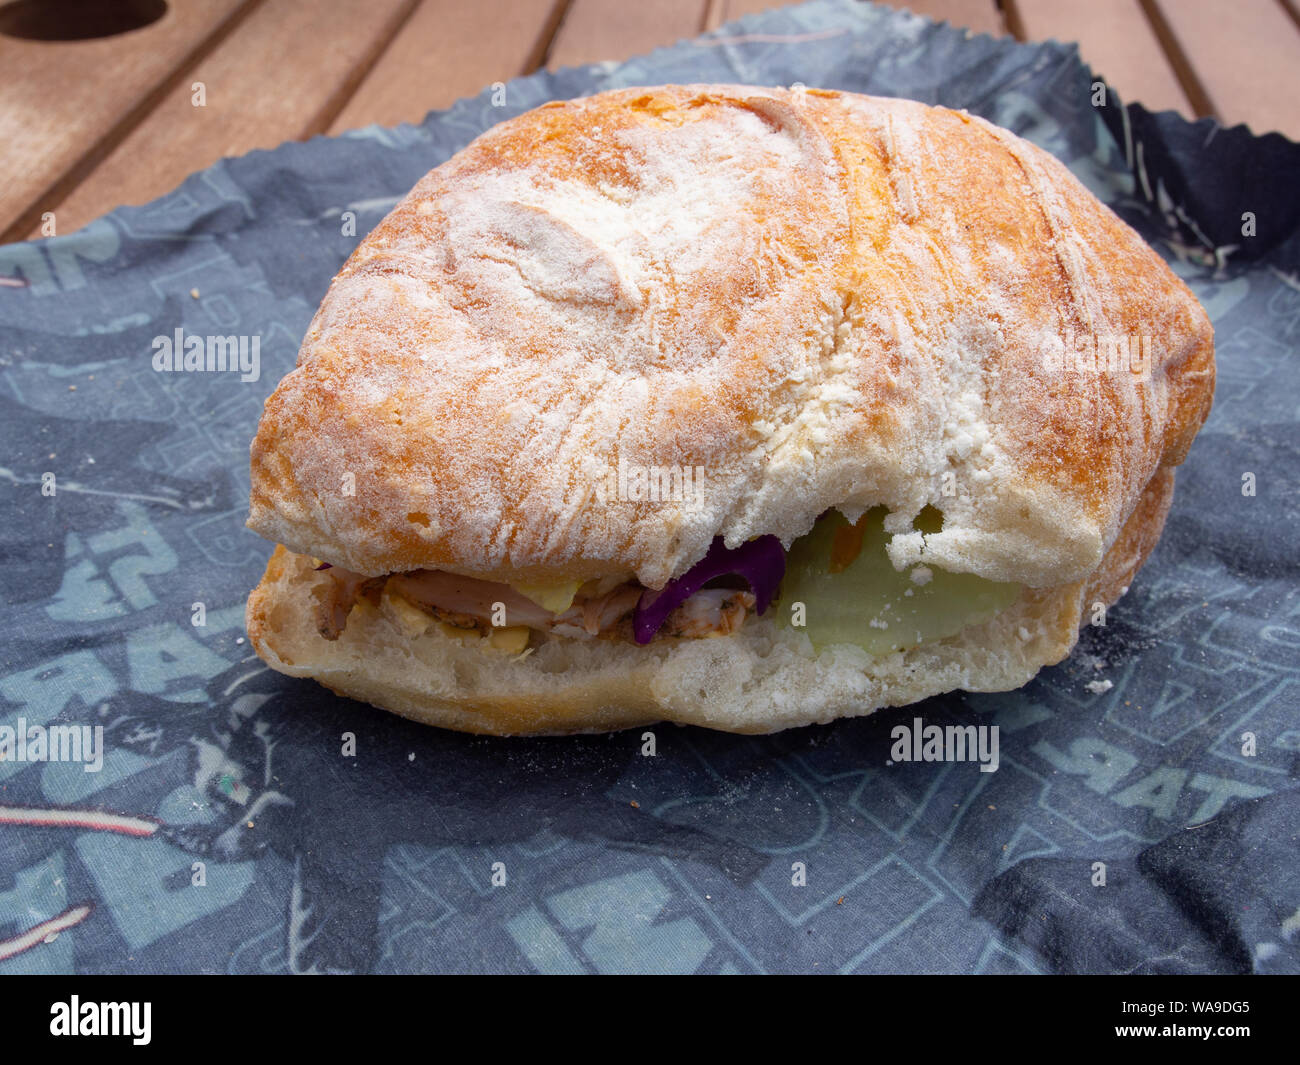 Filled Bread Roll For Lunch Stock Photo